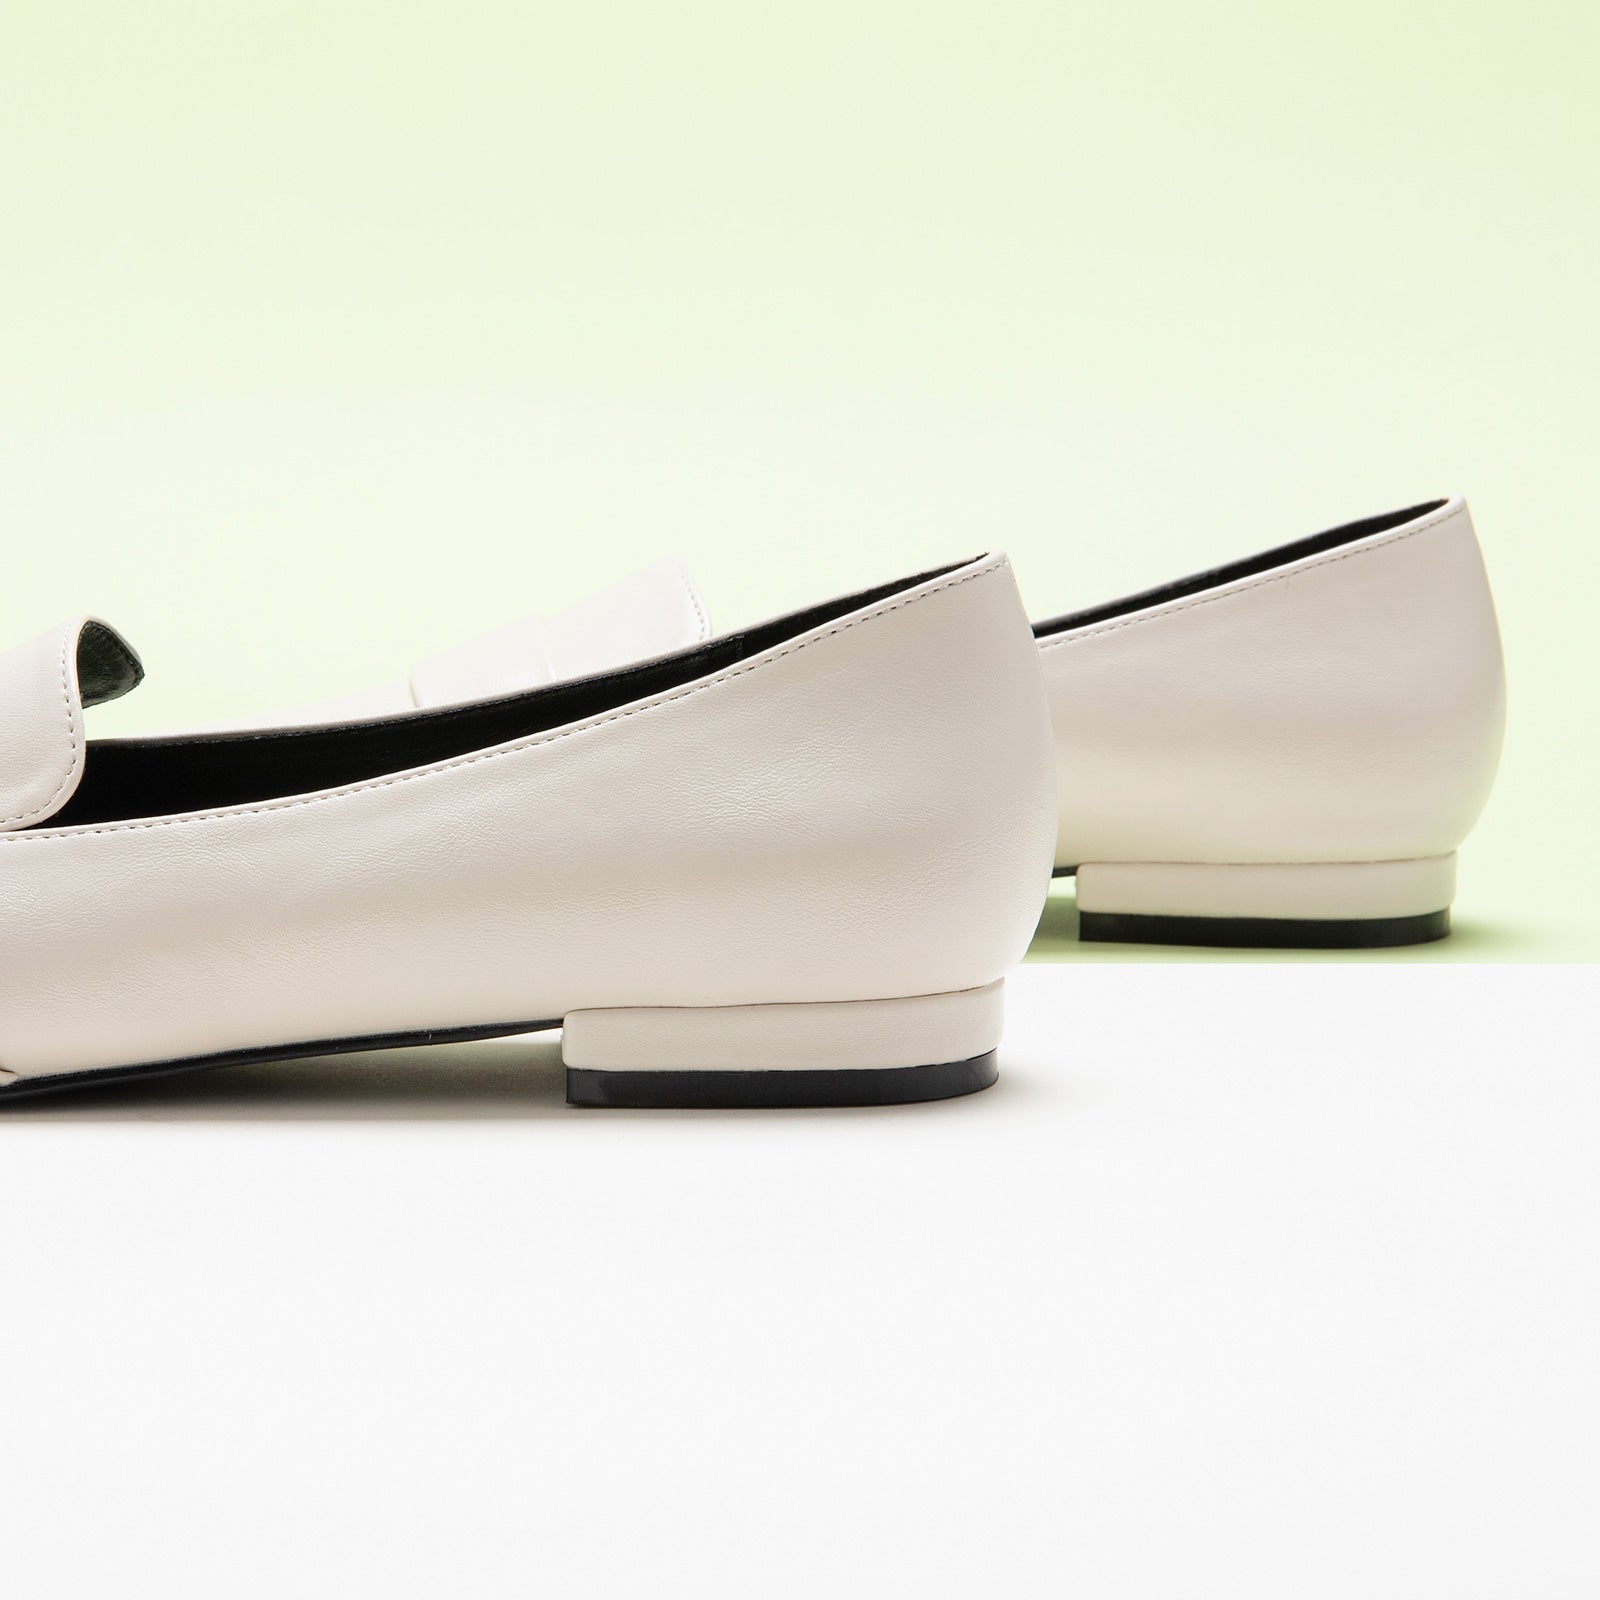  White Platform Loafers with Penny Strap, perfect for a confident and fashionable look in any urban setting